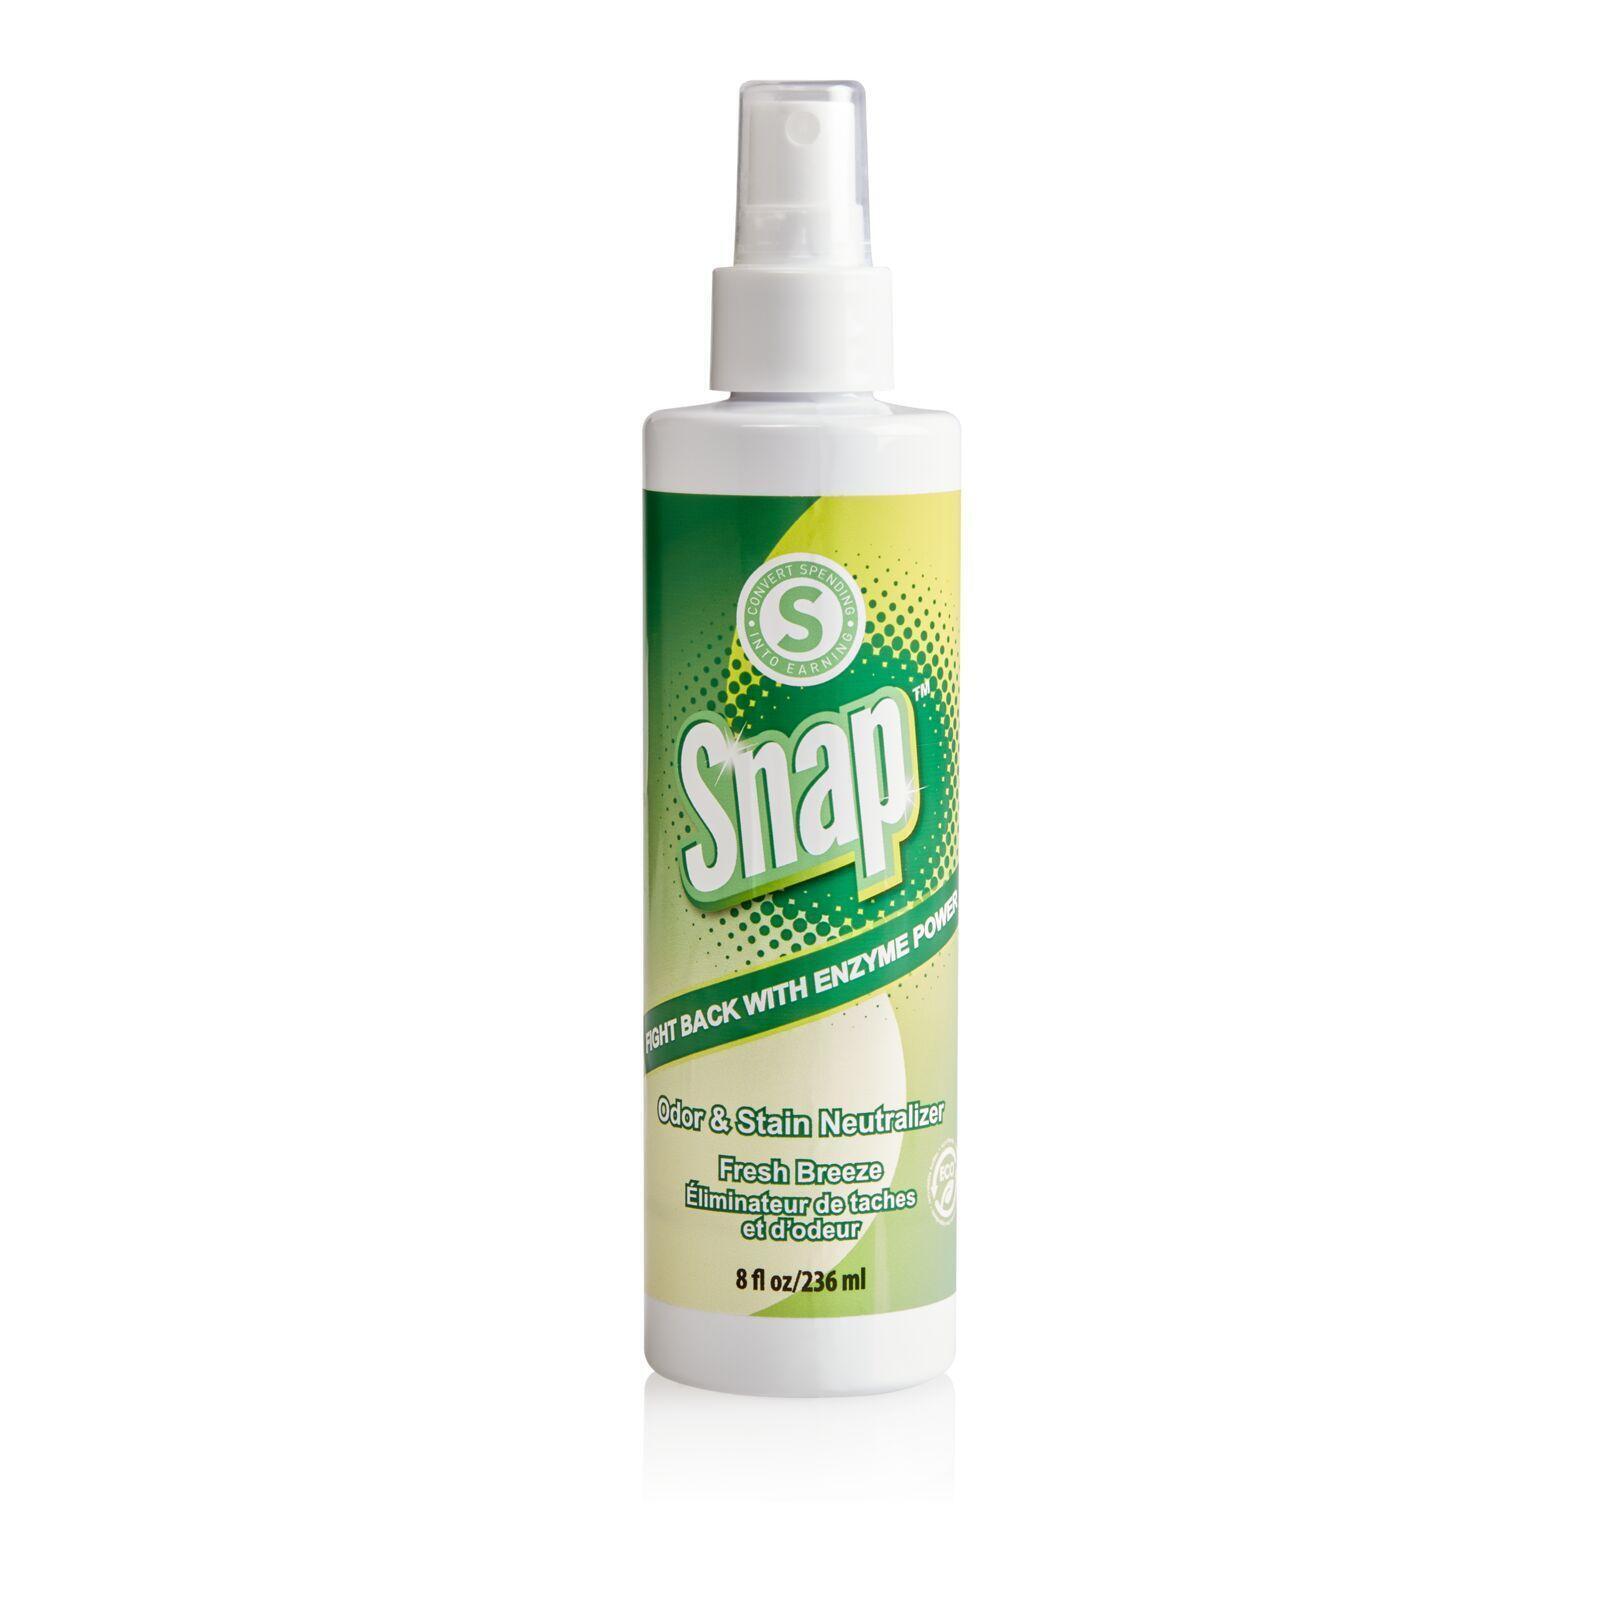 Shopping Annuity® Brand SNAP® Odor & Stain Neutralizer – Fresh Breeze